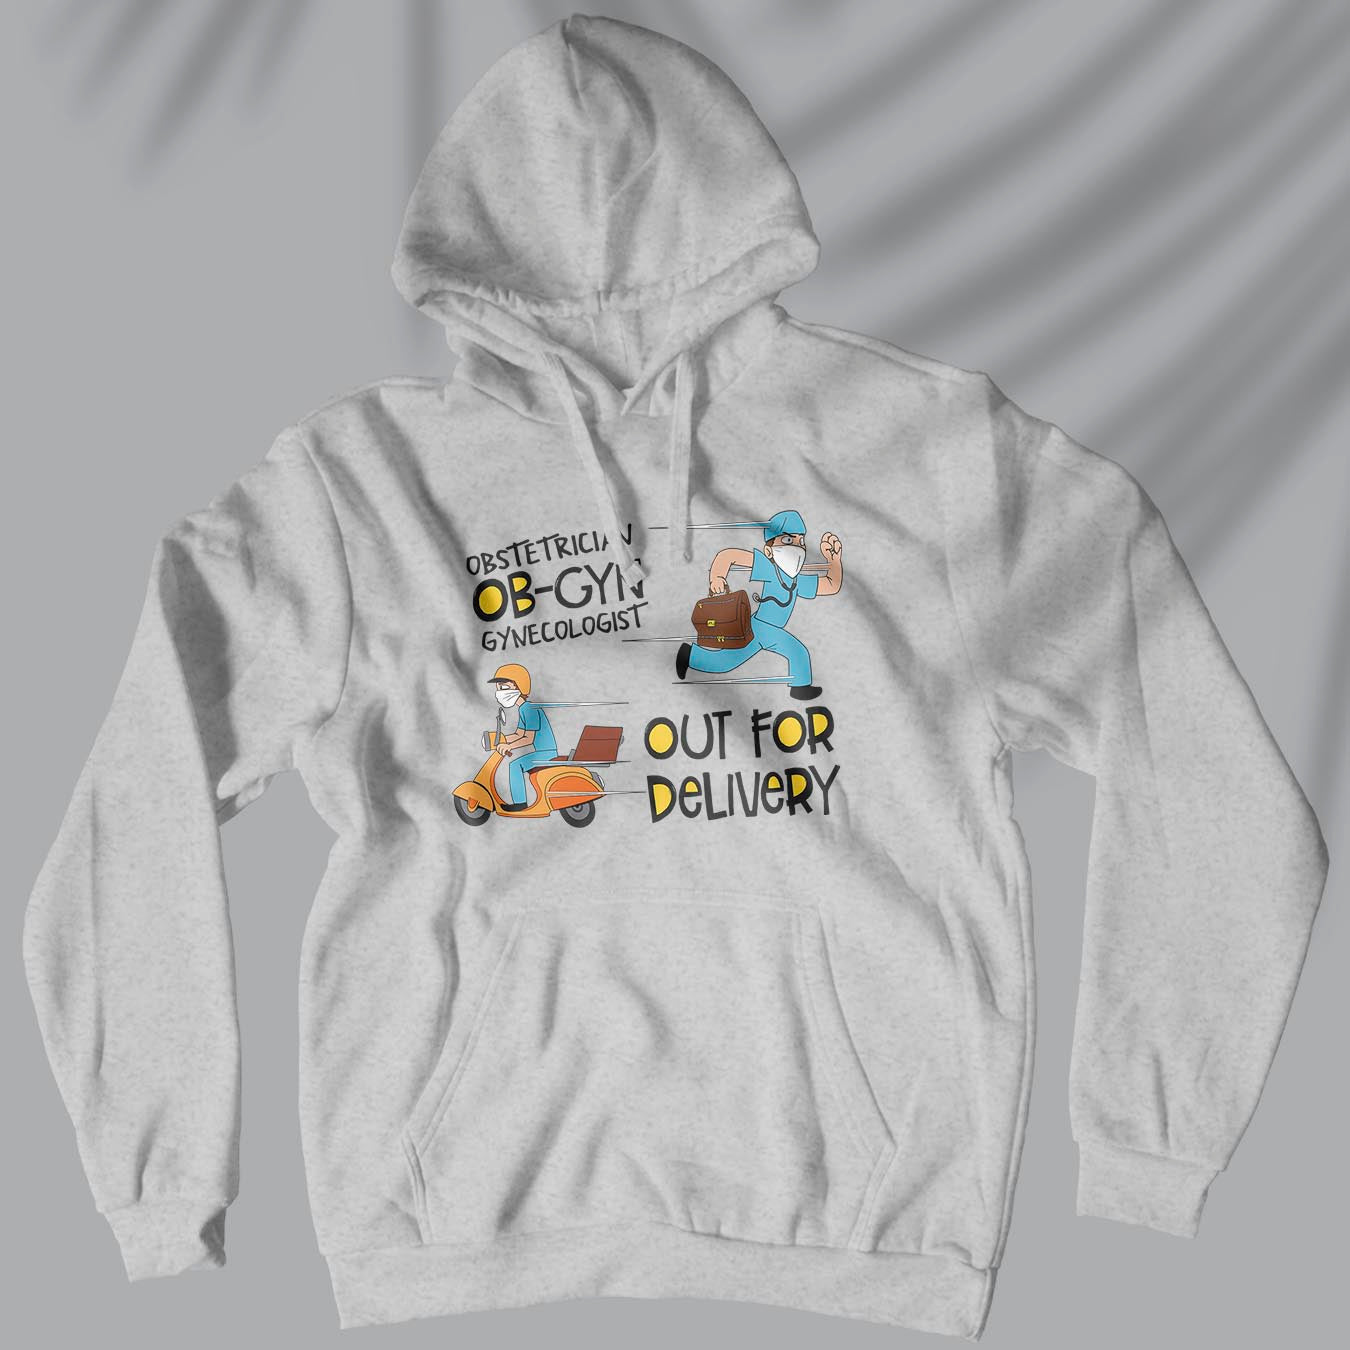 OB-GYN - Out For Delivery - Unisex Hoodie